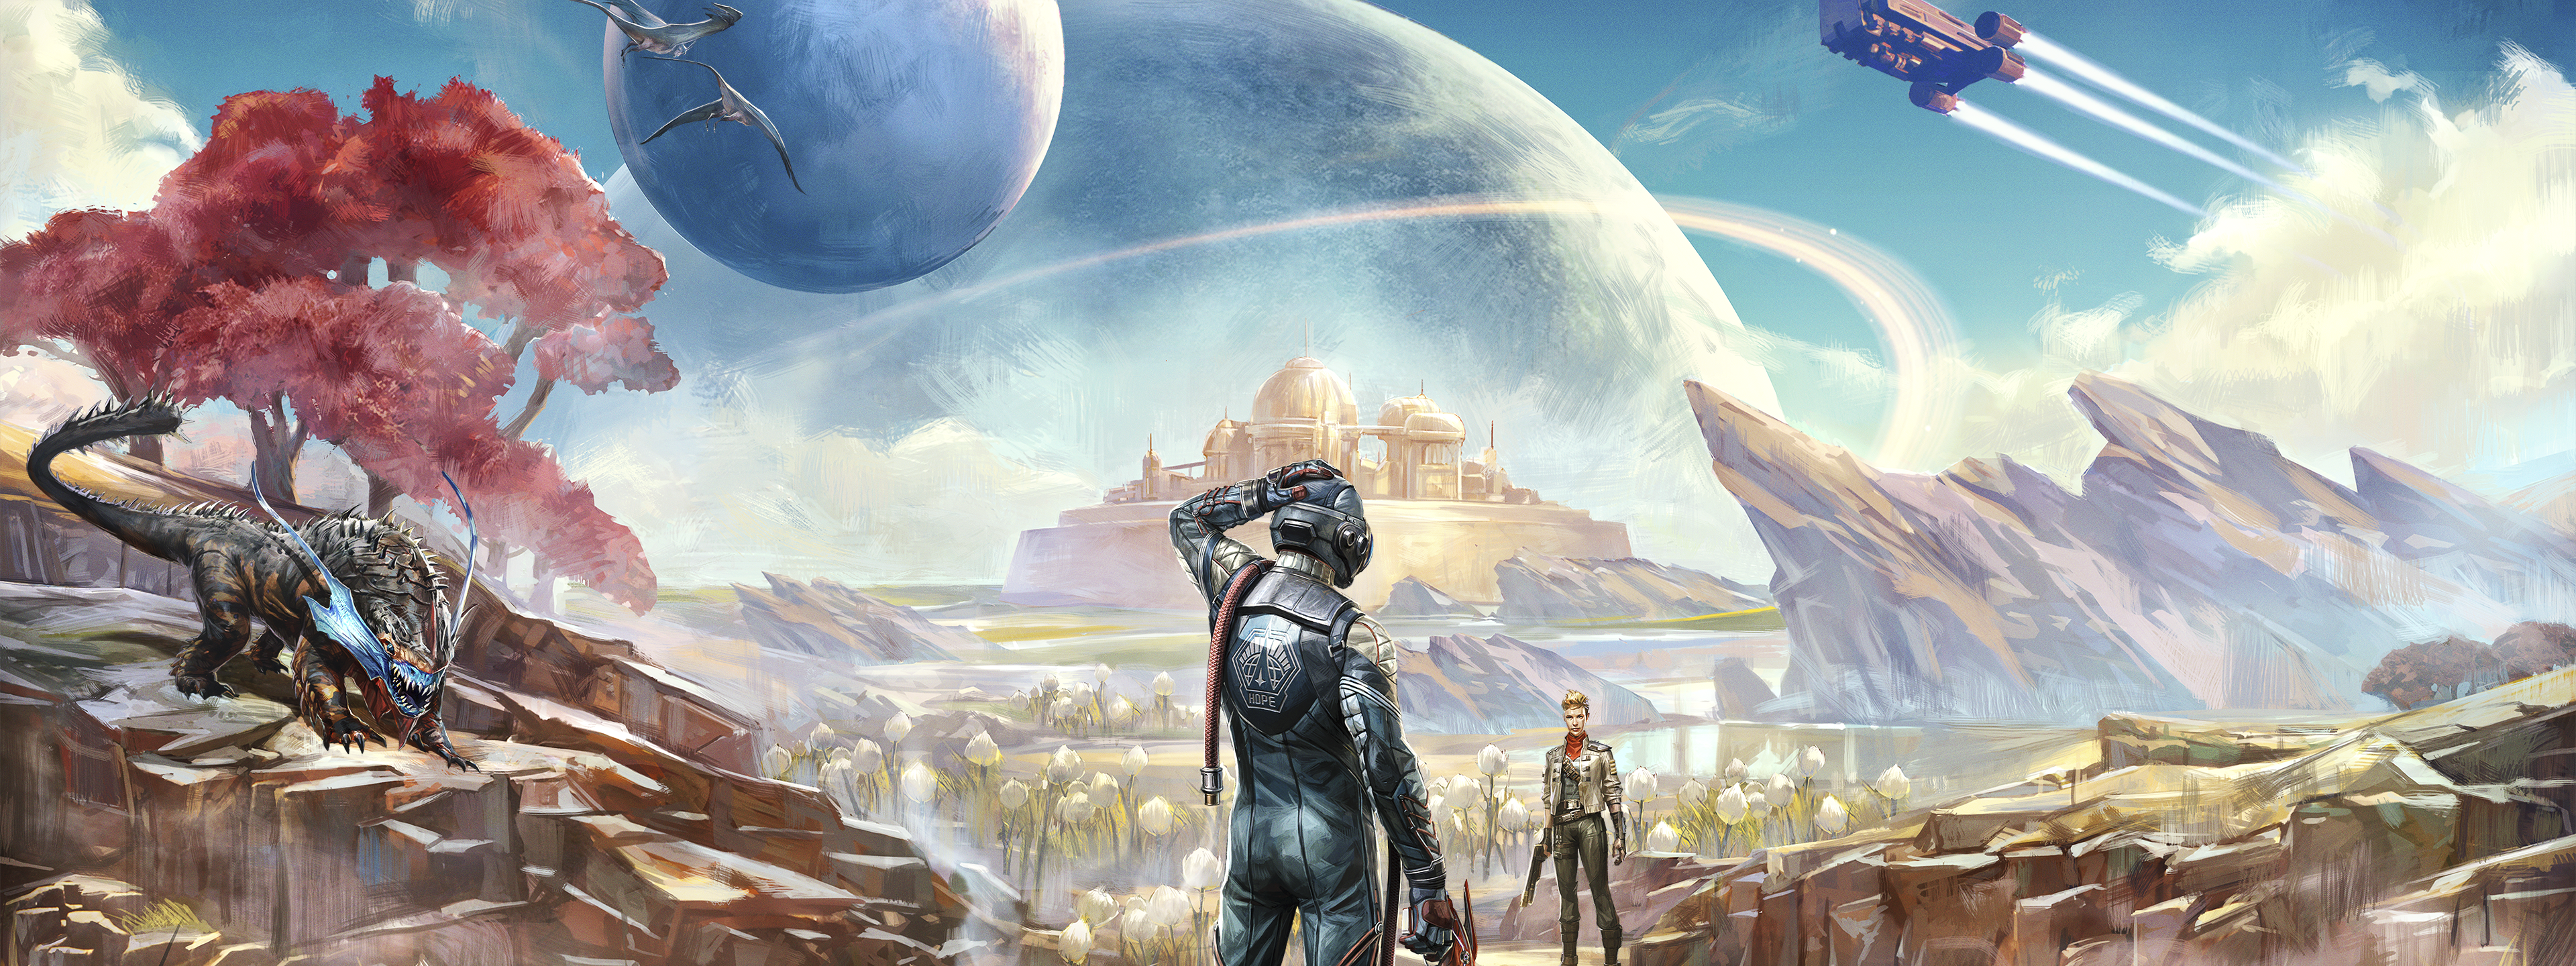 The Outer Worlds – key art